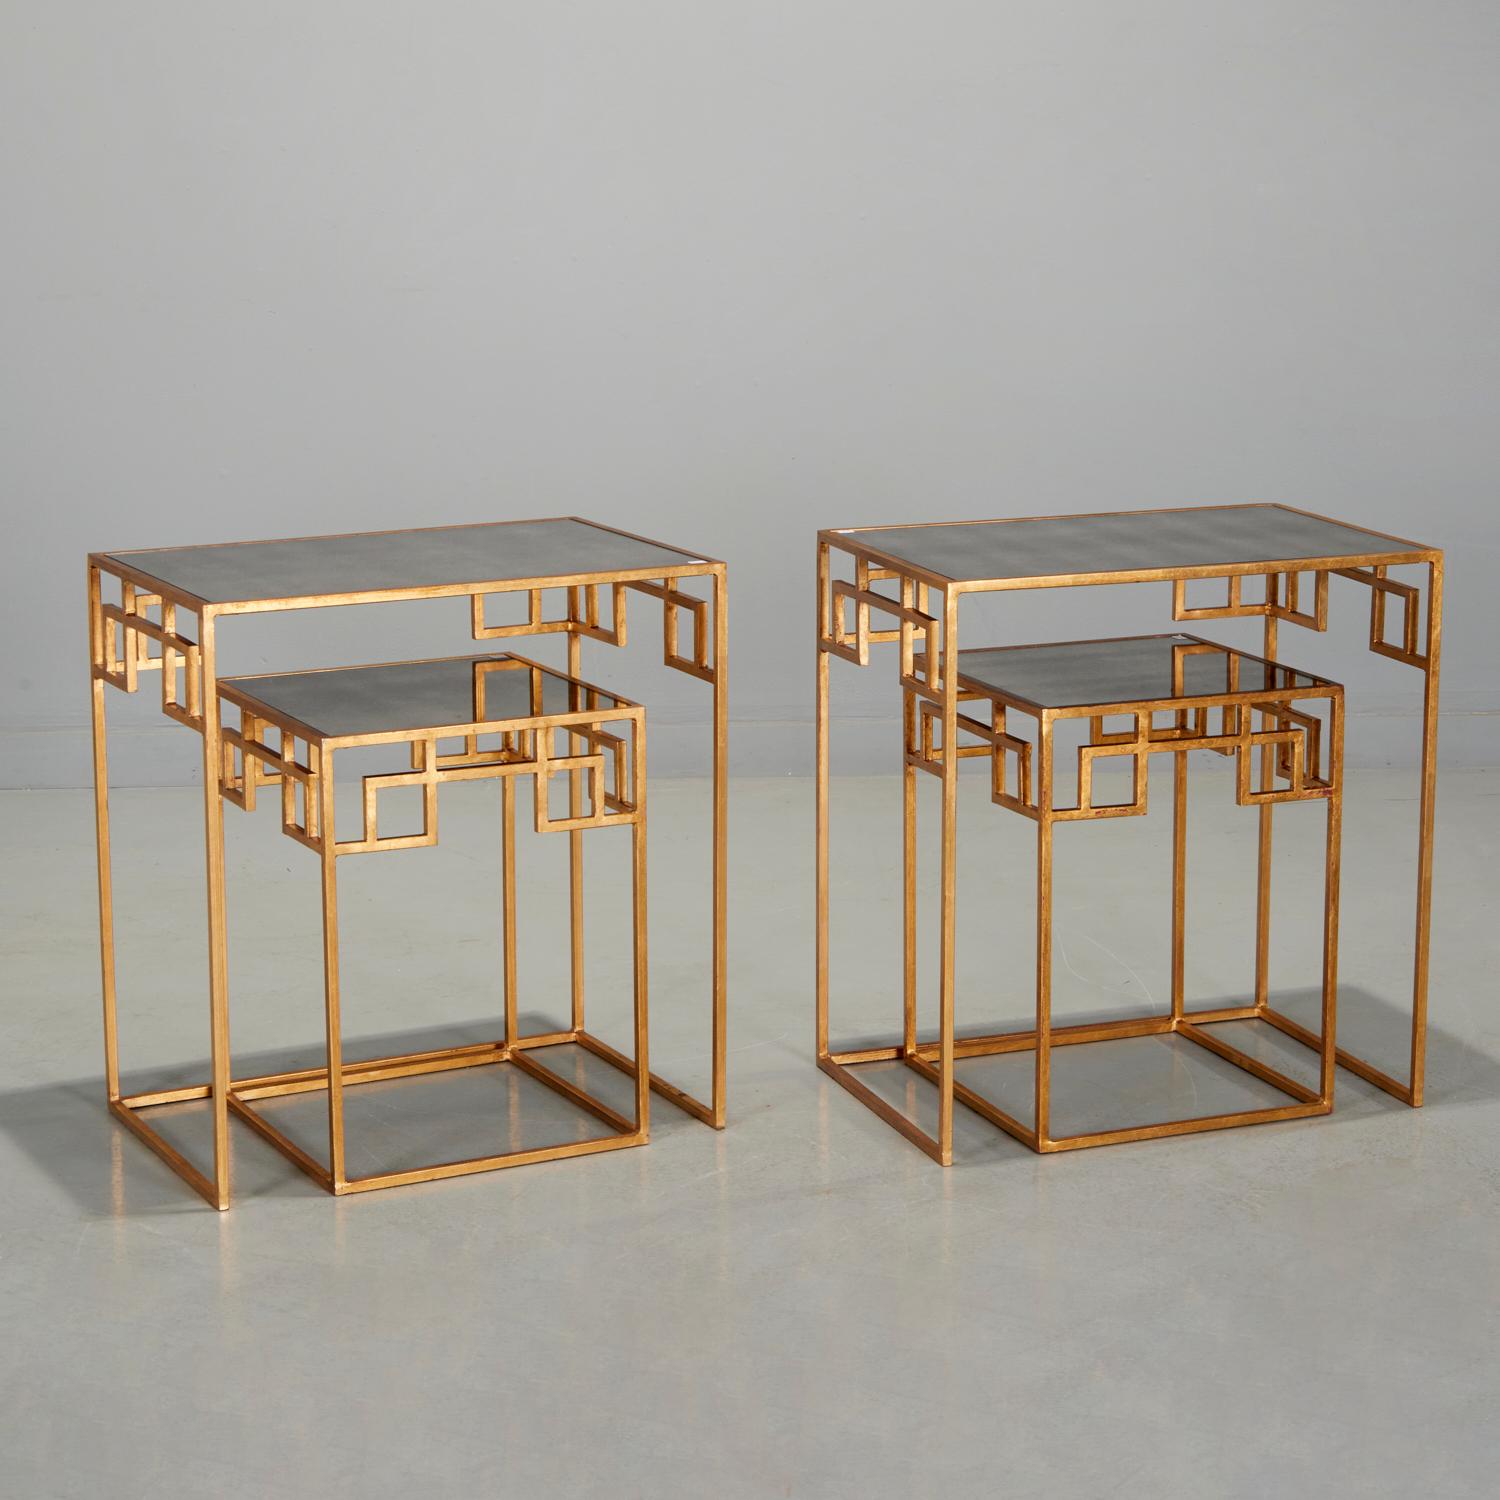 Pair Contemporary Gilt and Mirrored Glass Nesting Tables with Greek Key Design In Good Condition For Sale In Morristown, NJ